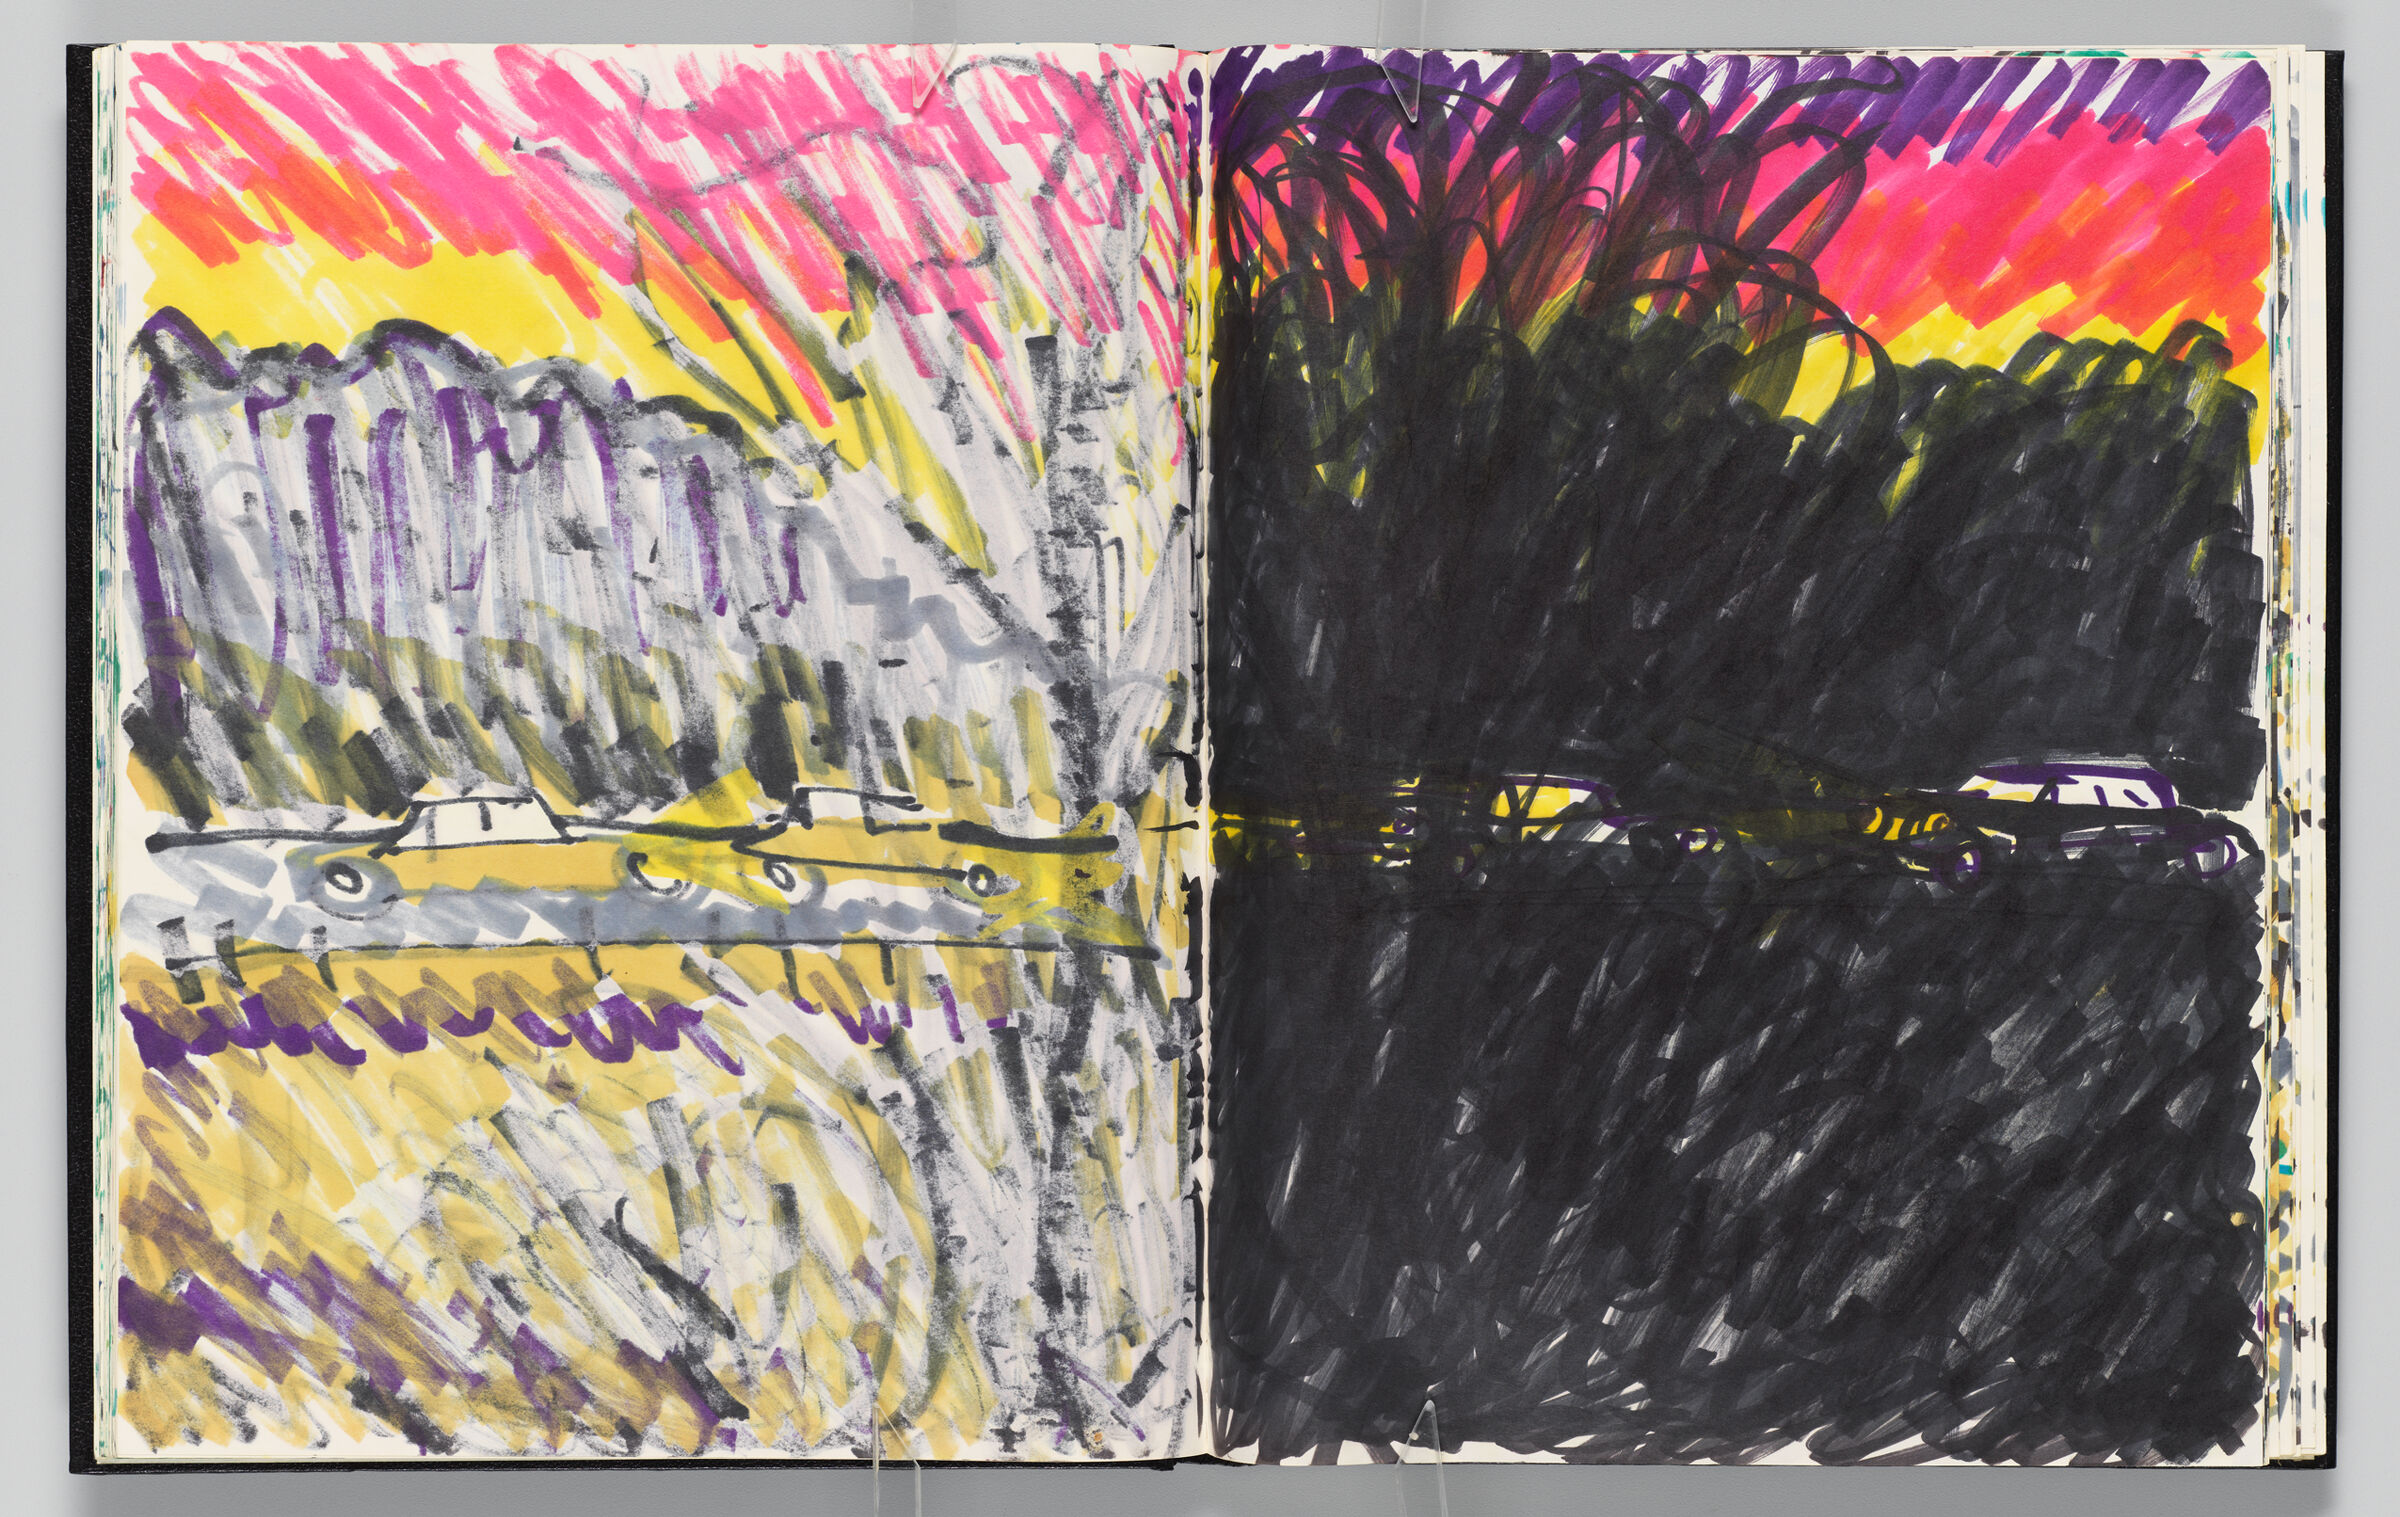 Untitled (Bleed-Through Of Previous Page, Left Page); Untitled (Cars Driving Through Landscape, Right Page)